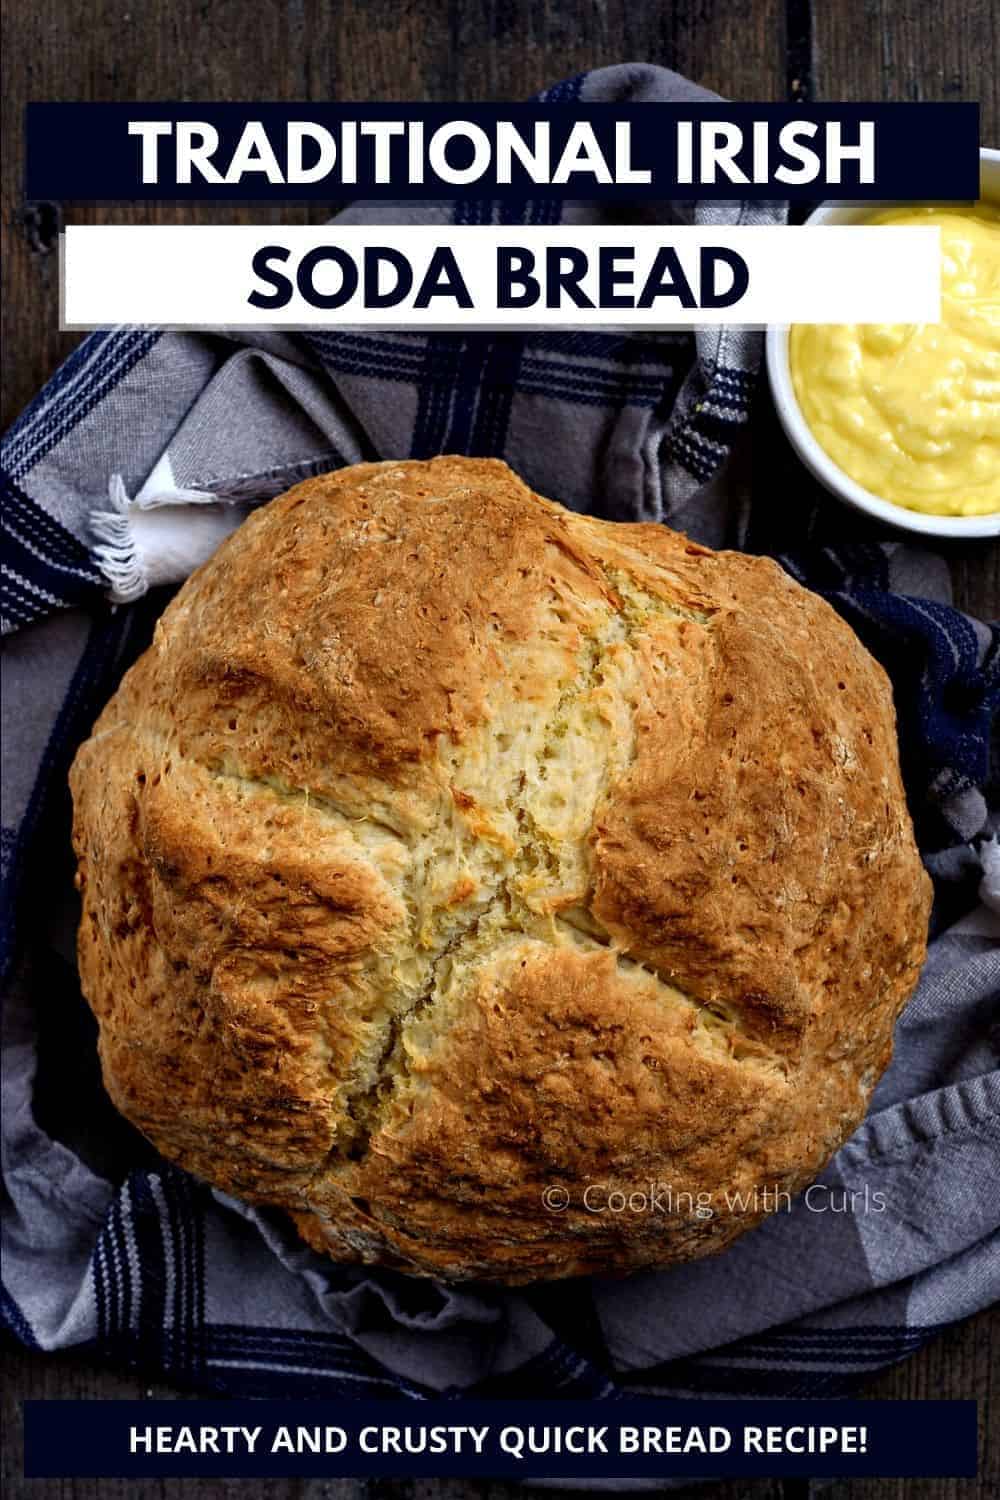 Looking down on a loaf of Traditional Irish Soda Bread with a bowl of butter on the side and title graphic across the top.